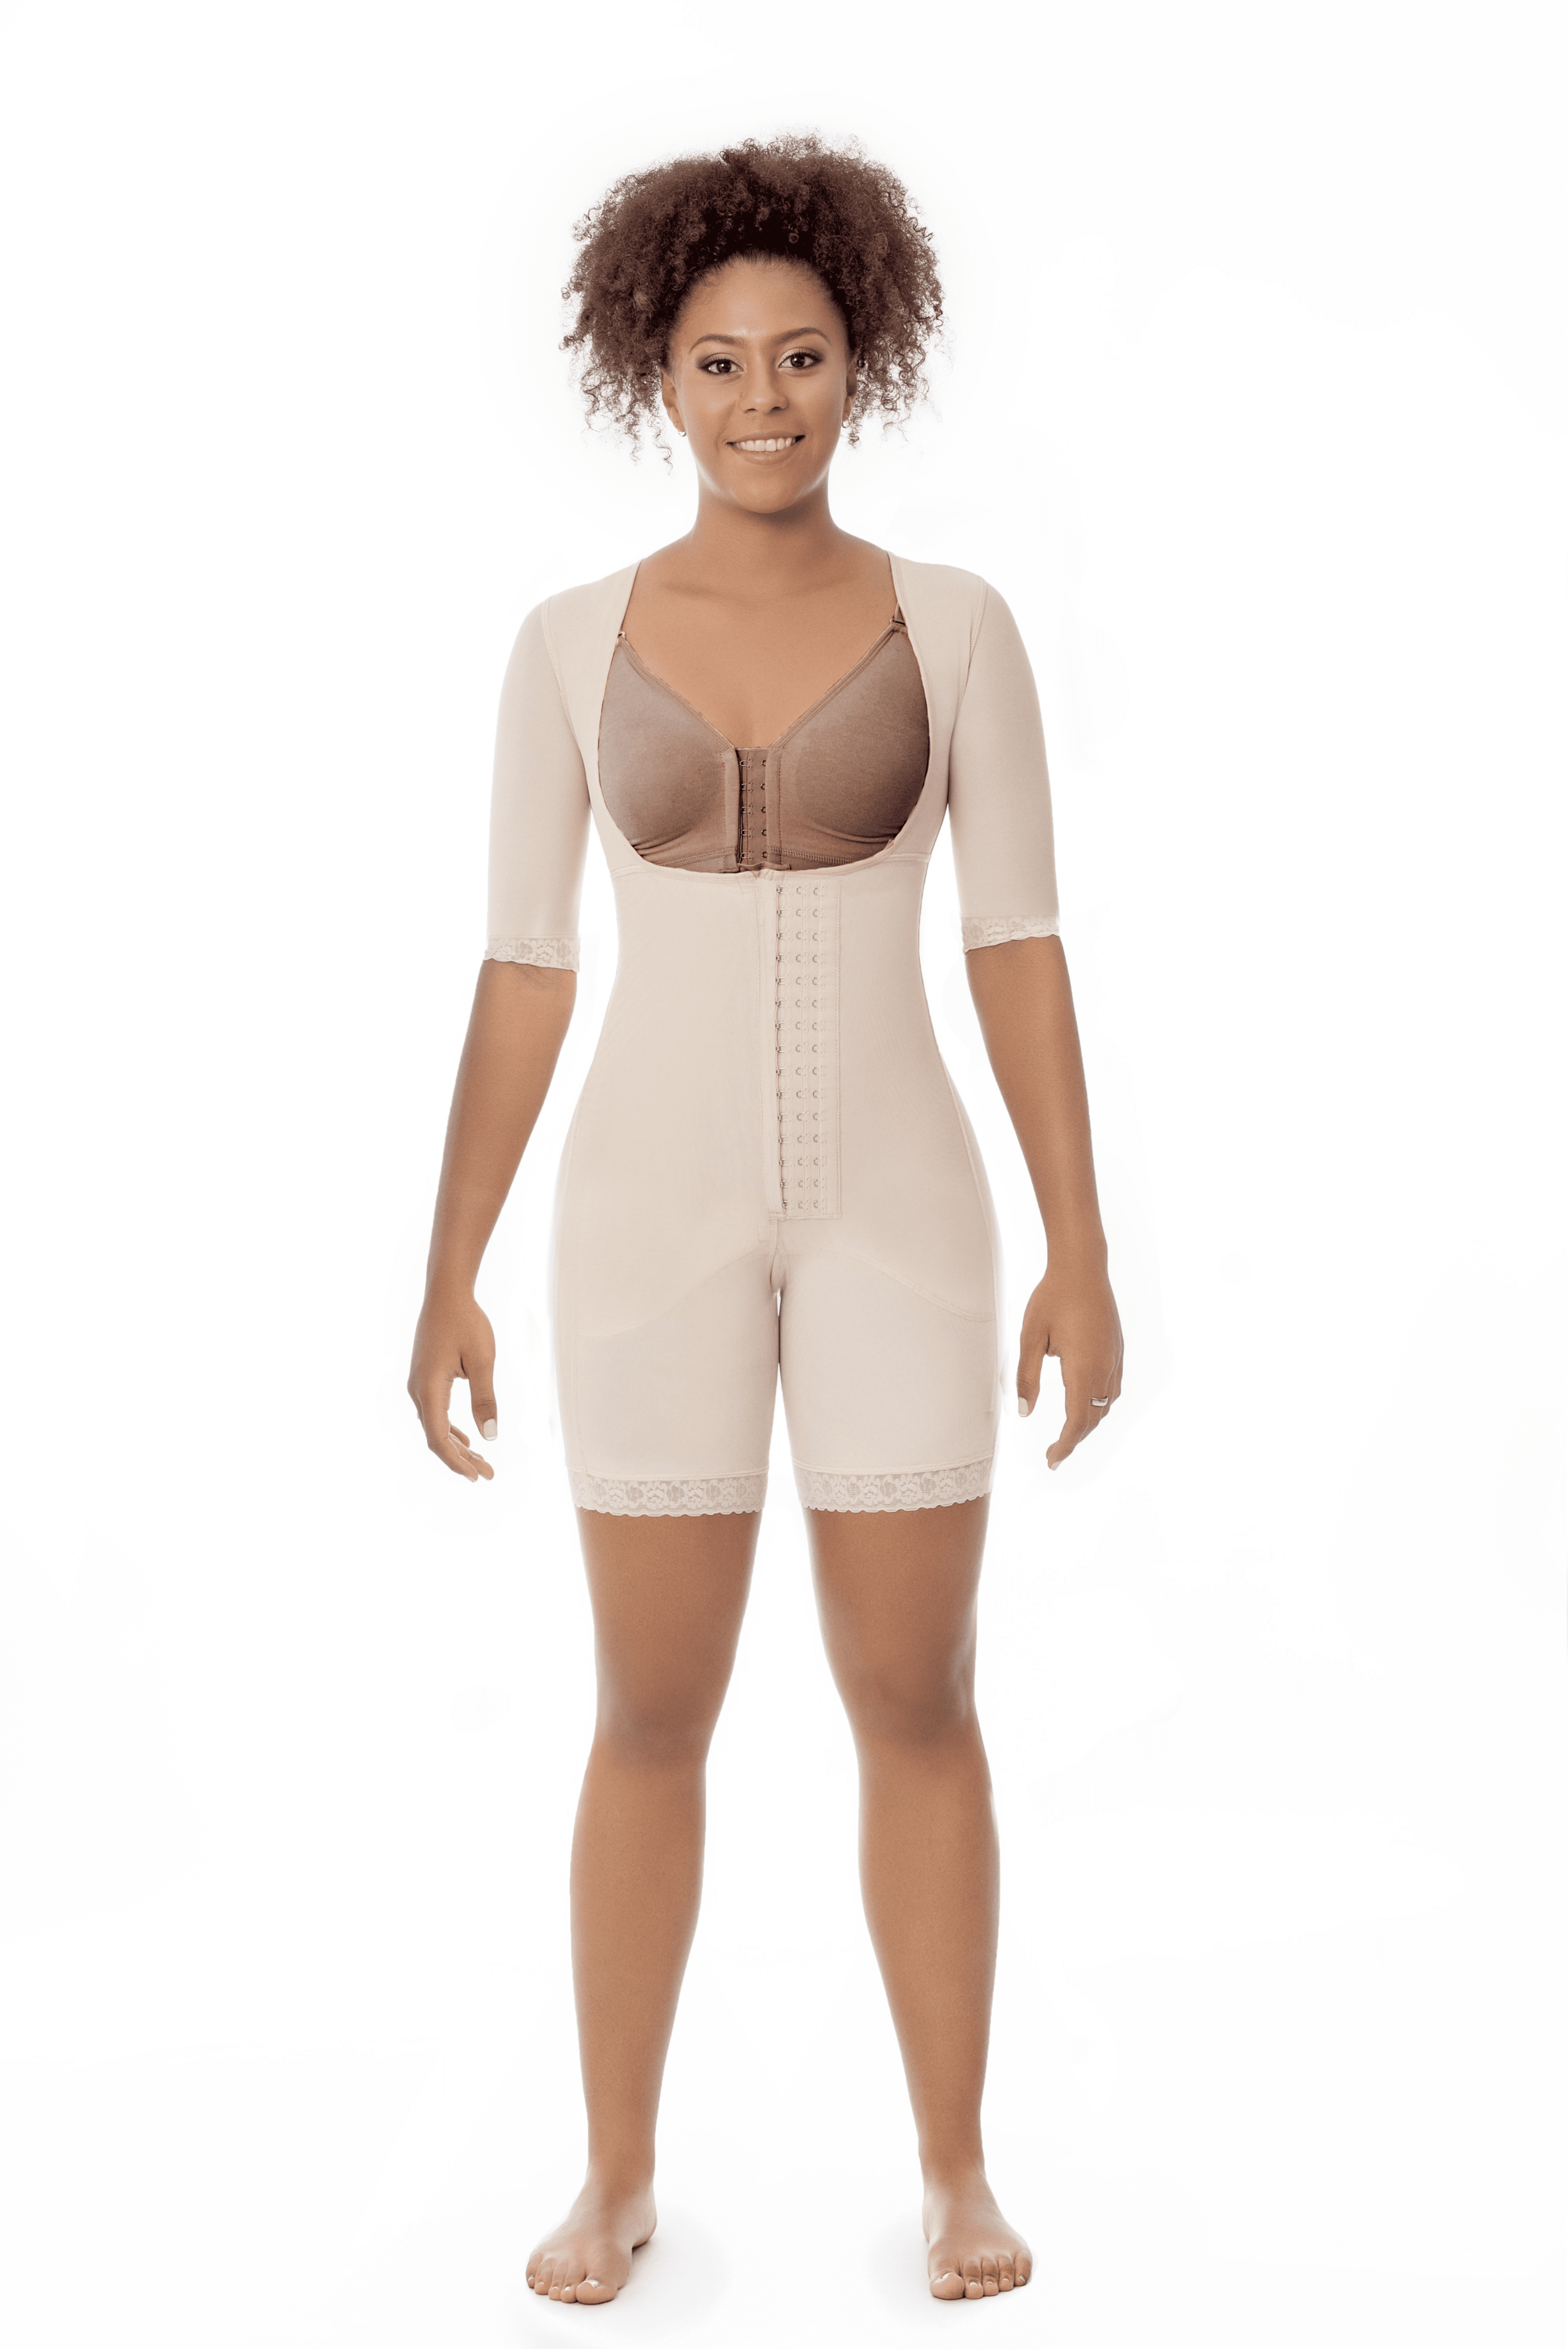 Stage 1 Compression Bundle: Option 8 (Braless full body above the